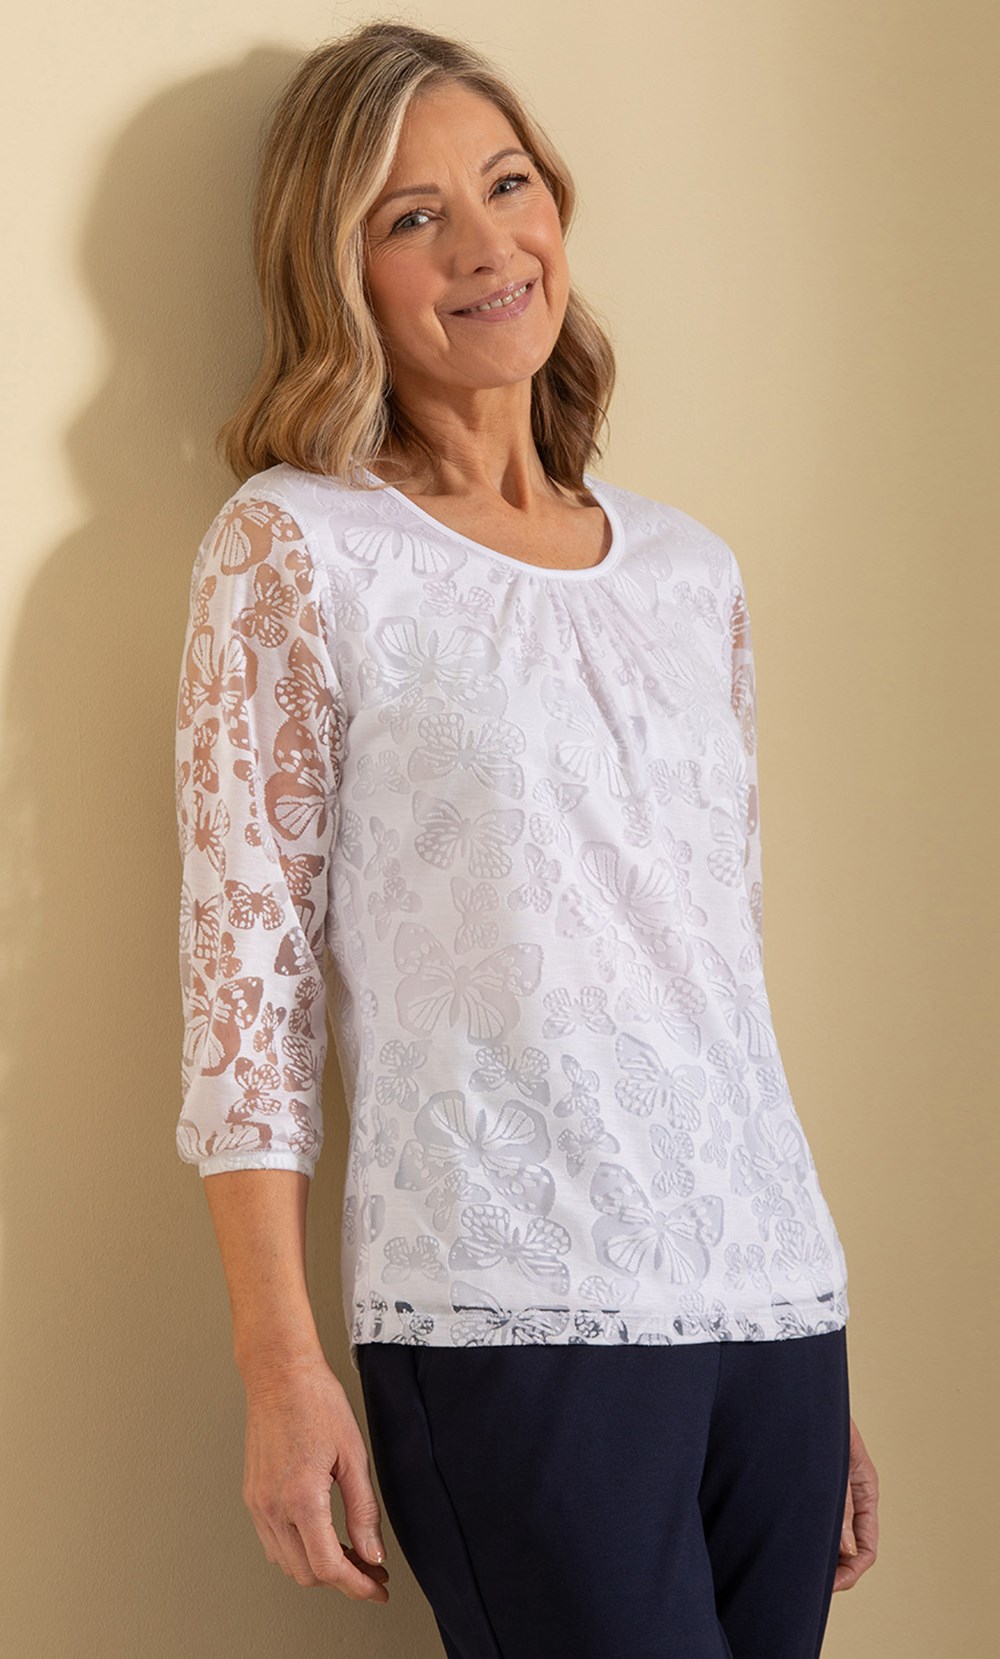 Brands - Anna Rose Anna Rose Burn Out Butterfly Top White Women’s